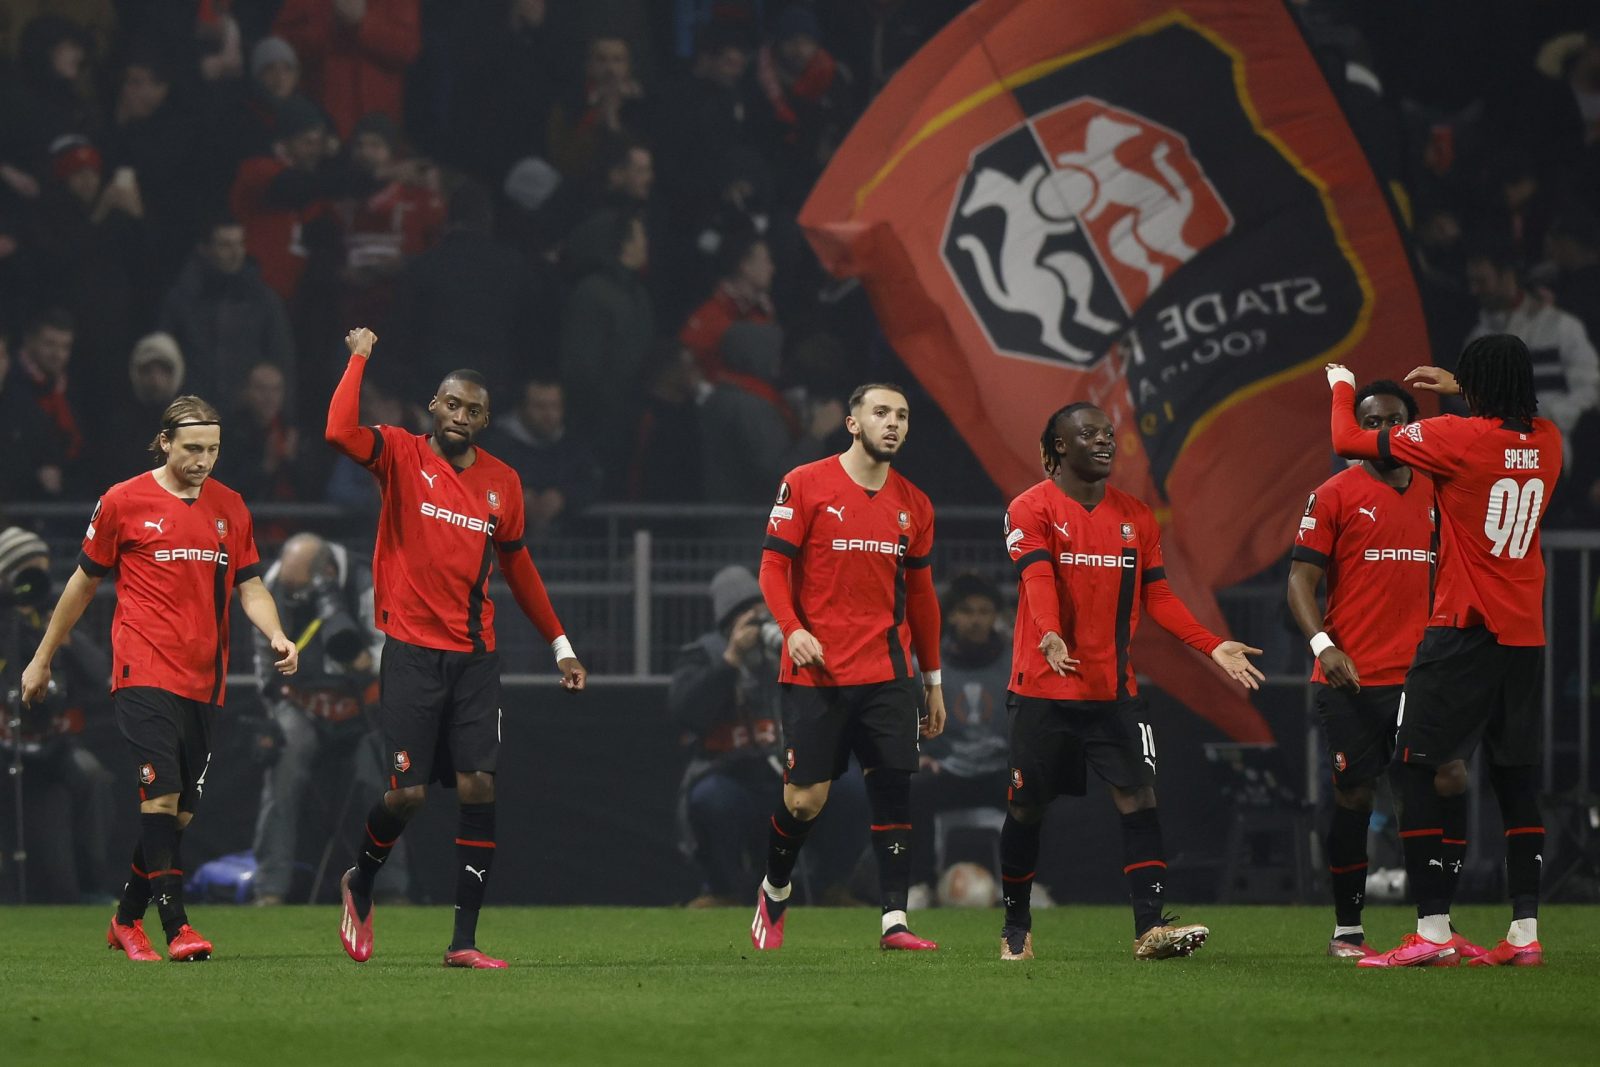 epa10486682 Rennes's Toko Ekambi Karl (2-L) celebrates scoring the 1-0 lead during the UEFA Europa League play-off, second leg soccer match between Rennes FC and Shakhtar Donetsk at the Roazhon Park Stadium in Rennes, France, 23 February 2023.  EPA/YOAN VALAT